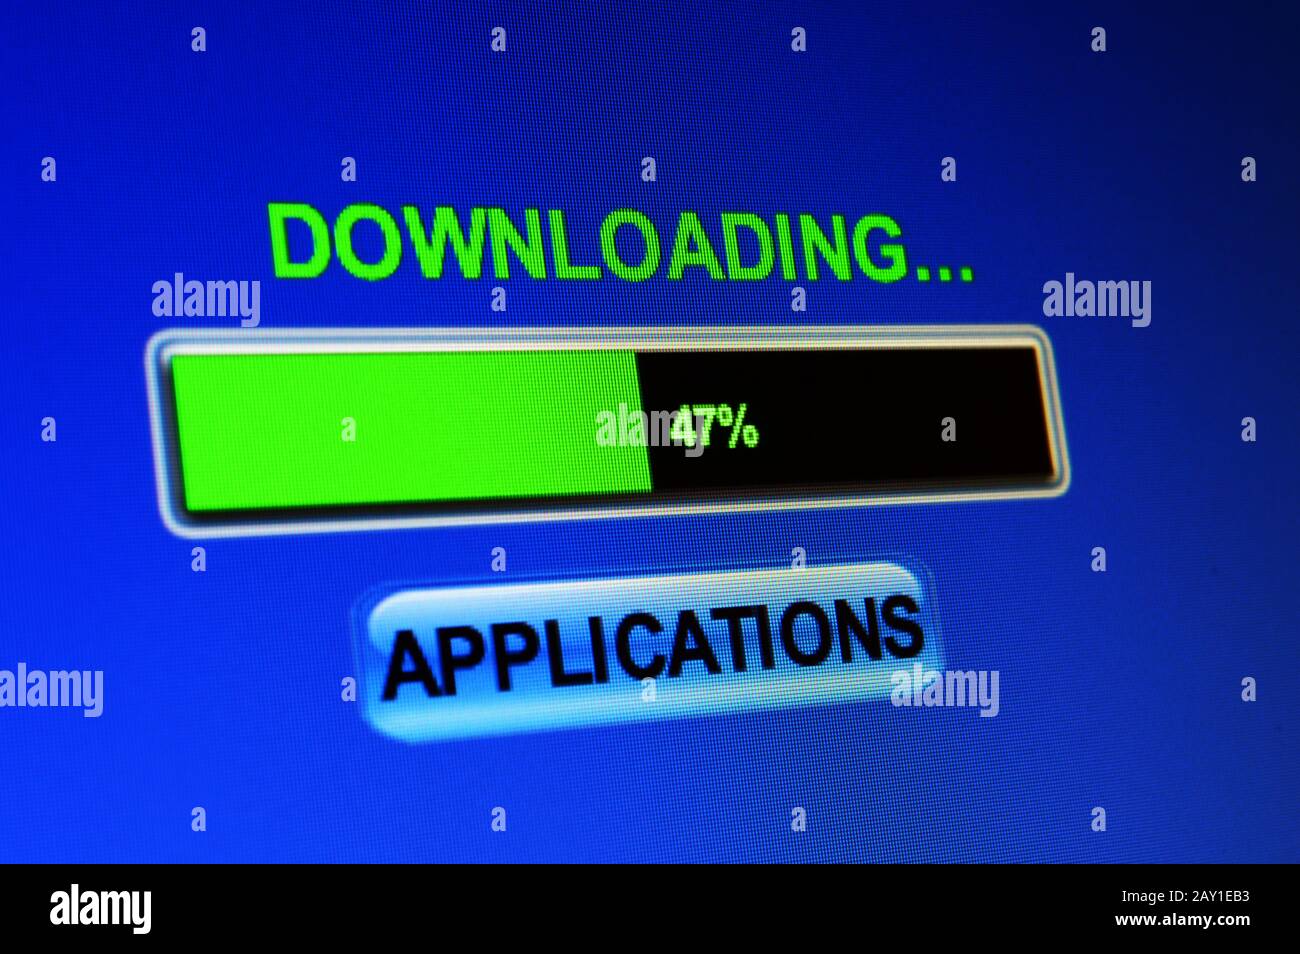 Downloading applications Stock Photo